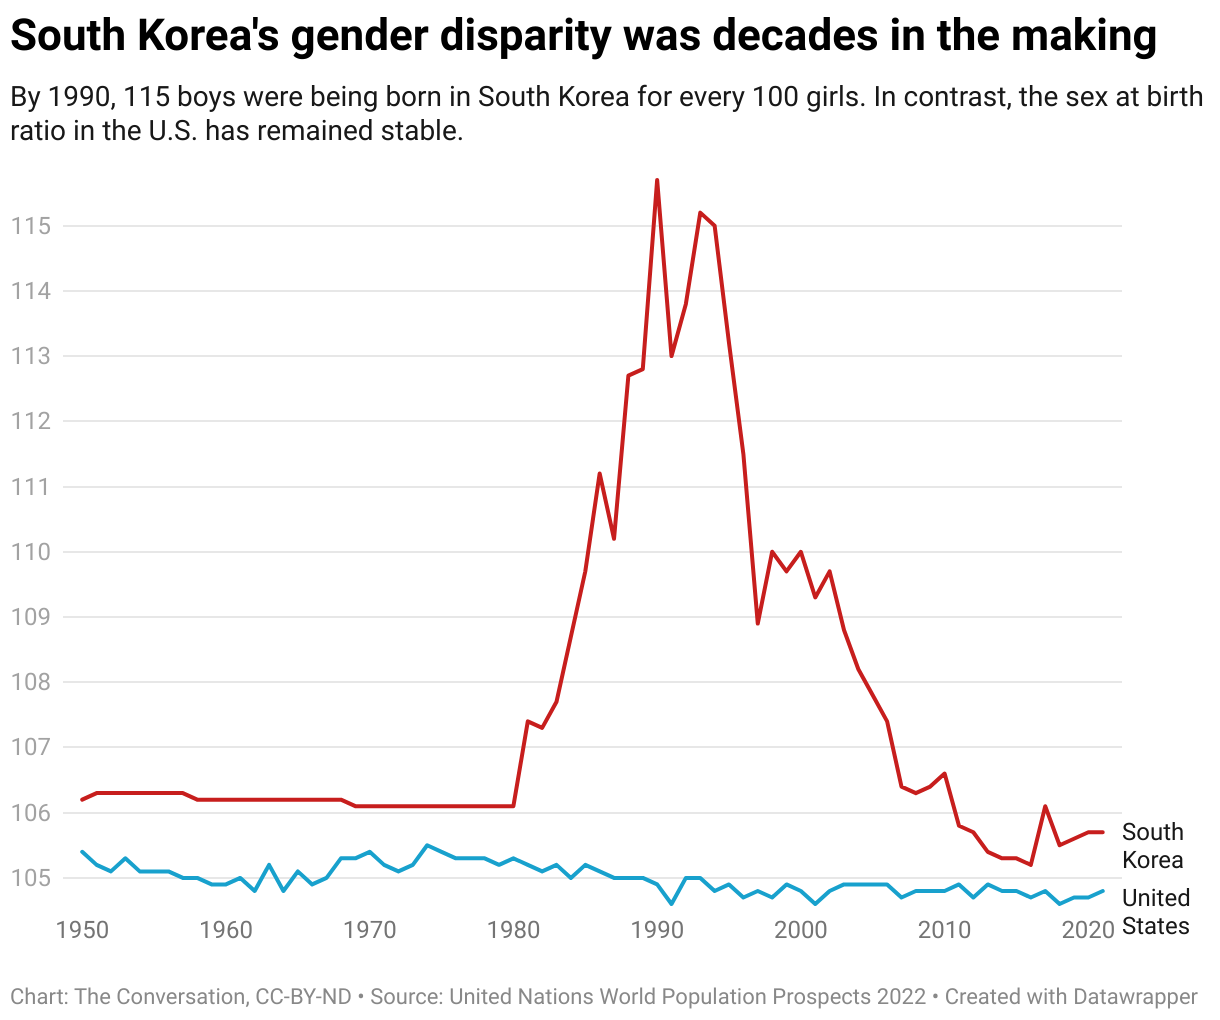 south korea's gender imbalance is bad news for men − outnumbering women, many face bleak marriage prospects